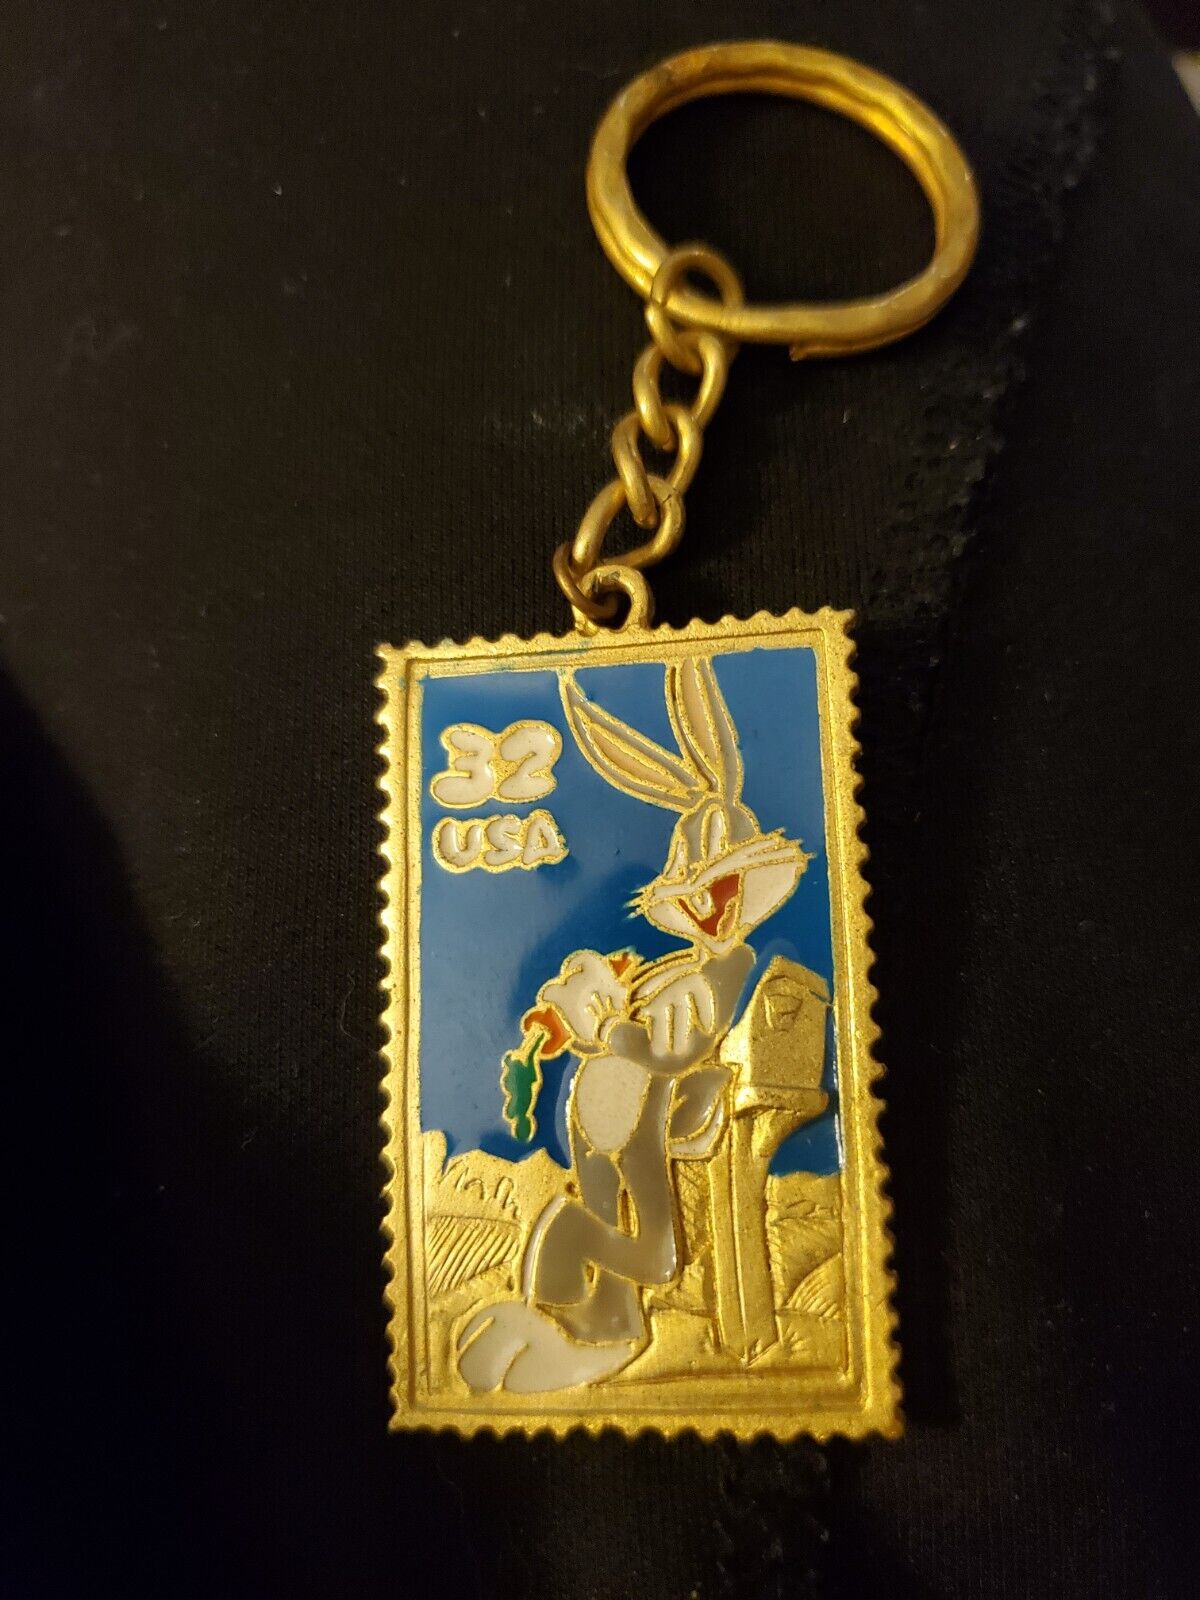 Looney Toons Bugs Bunny Stamp Key Chain 1997, 32 cents